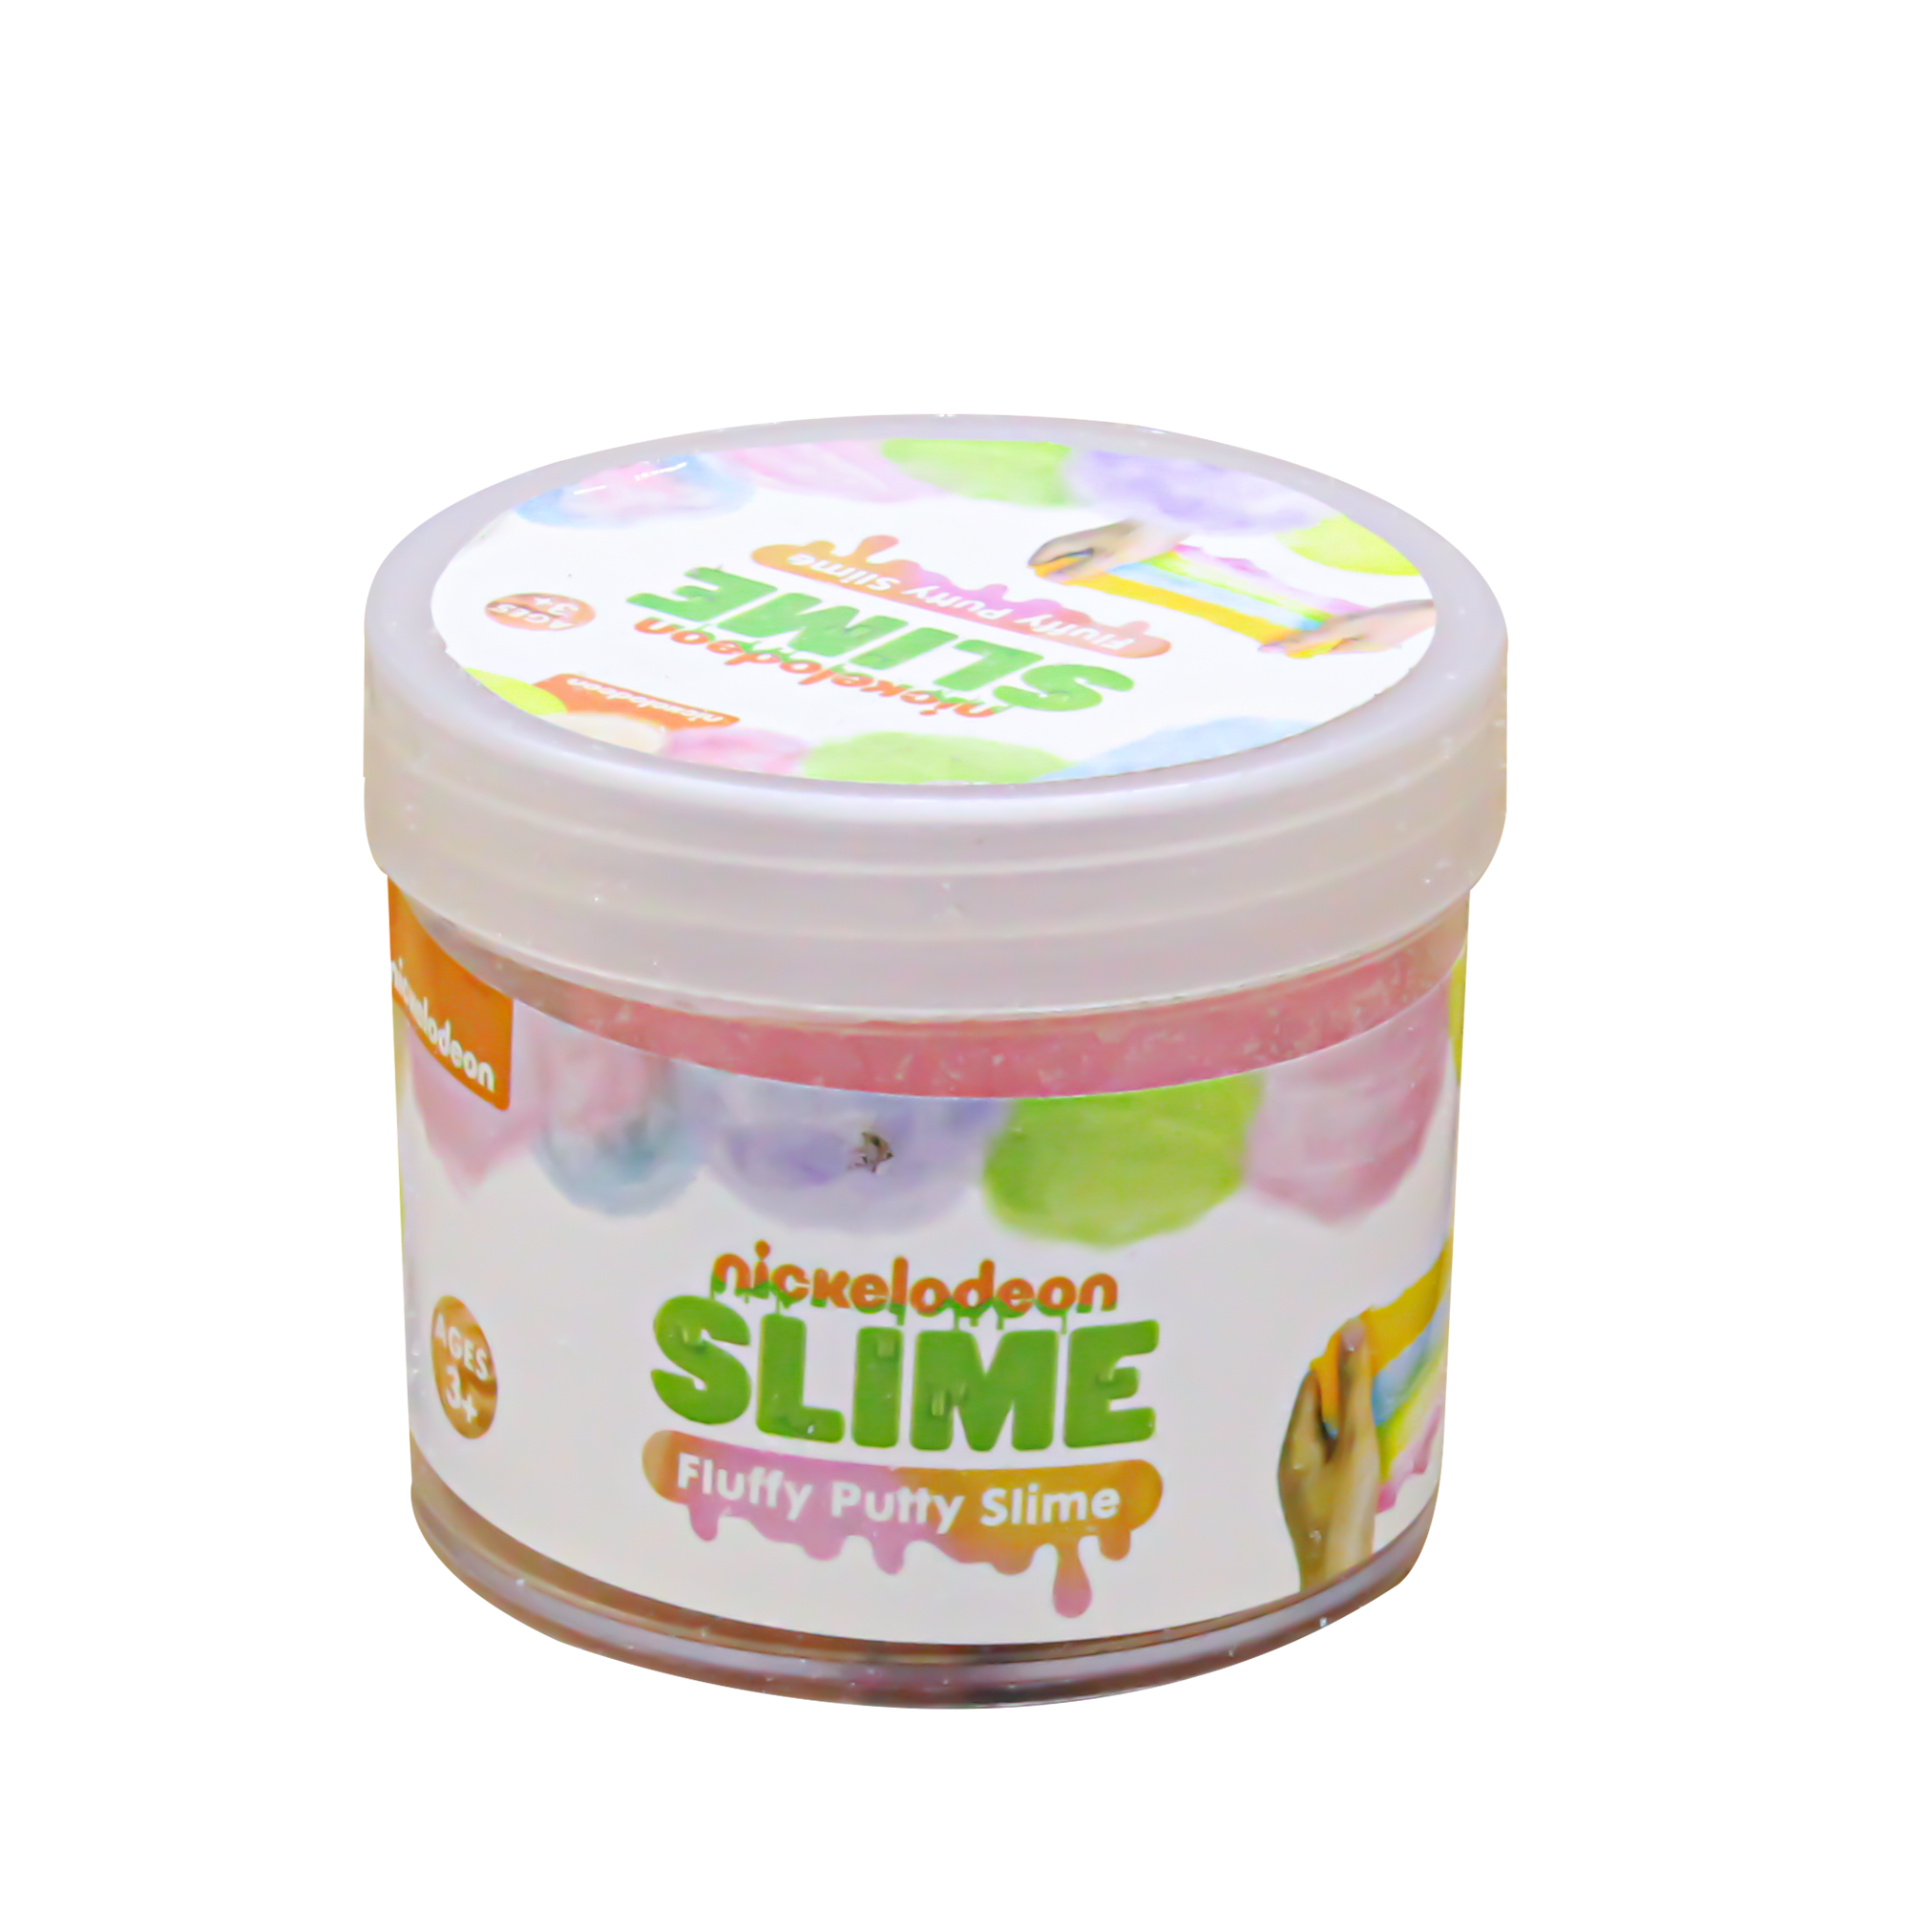 Wow Play Nickelodeon Slime Fluffy Putty Slime - Pink